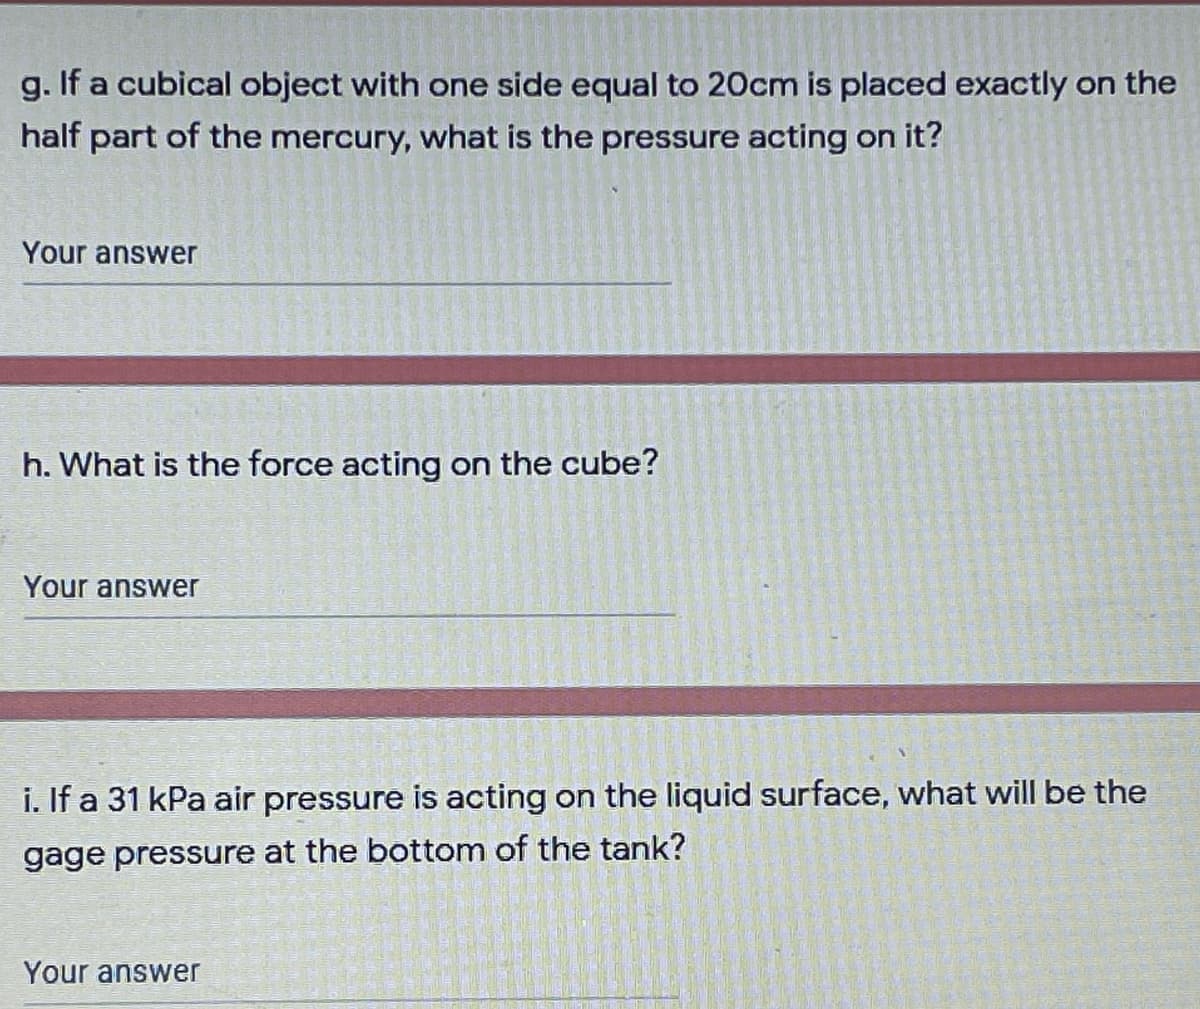 g. If a cubical object with one side equal to 20cm is placed exactly on the
half part of the mercury, what is the pressure acting on it?
Your answer
h. What is the force acting on the cube?
Your answer
i. If a 31 kPa air pressure is acting on the liquid surface, what will be the
gage pressure at the bottom of the tank?
Your answer
